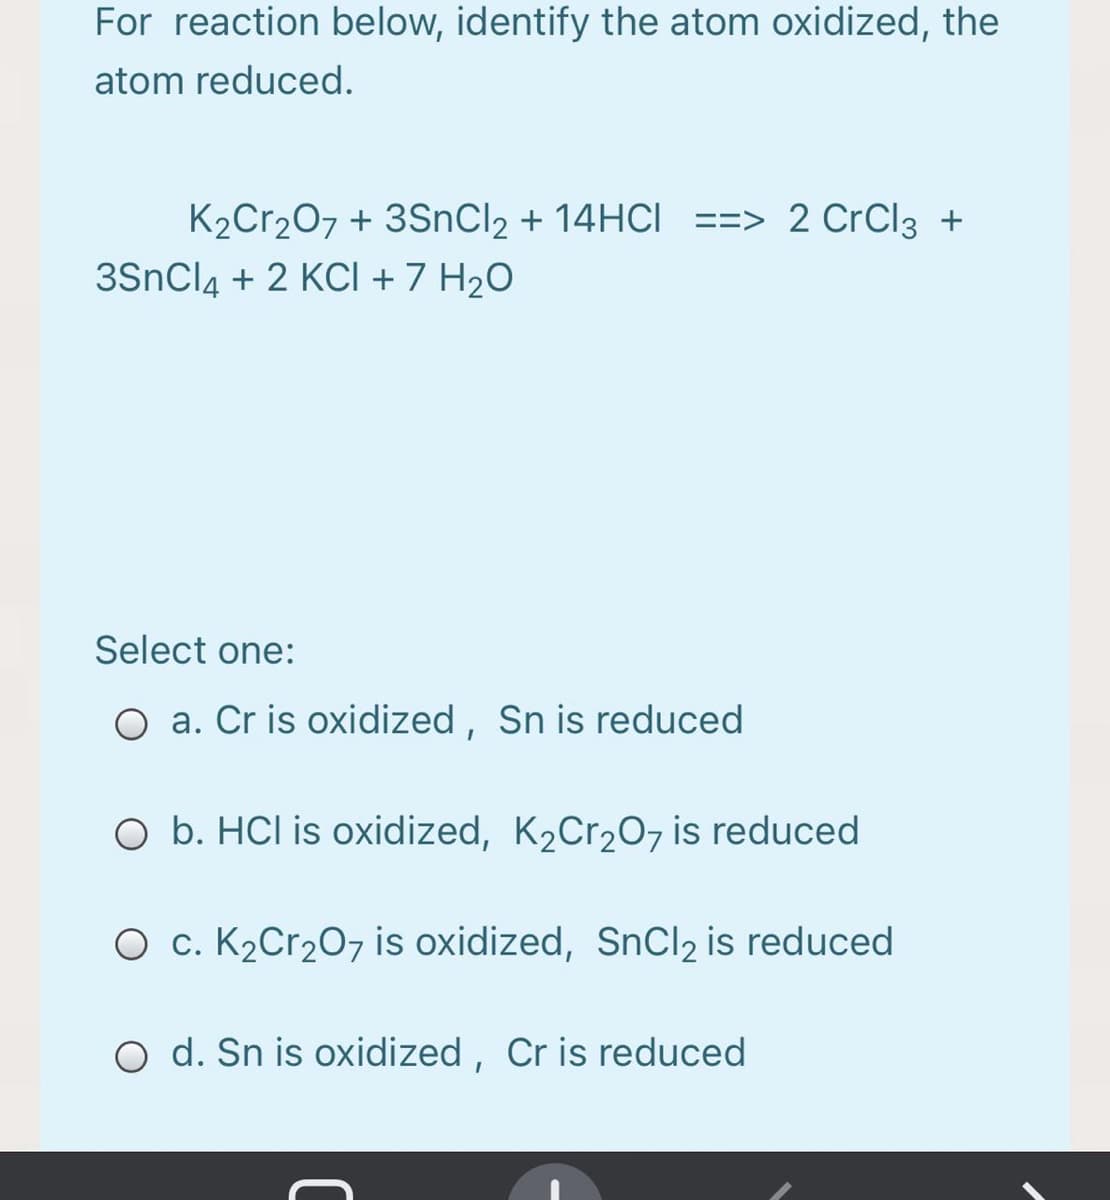 For reaction below, identify the atom oxidized, the
atom reduced.
K2Cr207 + 3SnCl2 + 14HCI ==> 2 CrCl3 +
3SnCl4 + 2 KCI + 7 H2O
Select one:
O a. Cr is oxidized, Sn is reduced
O b. HCl is oxidized, K2Cr20, is reduced
O c. K2Cr2O7 is oxidized, SnCl2 is reduced
O d. Sn is oxidized , Cr is reduced
